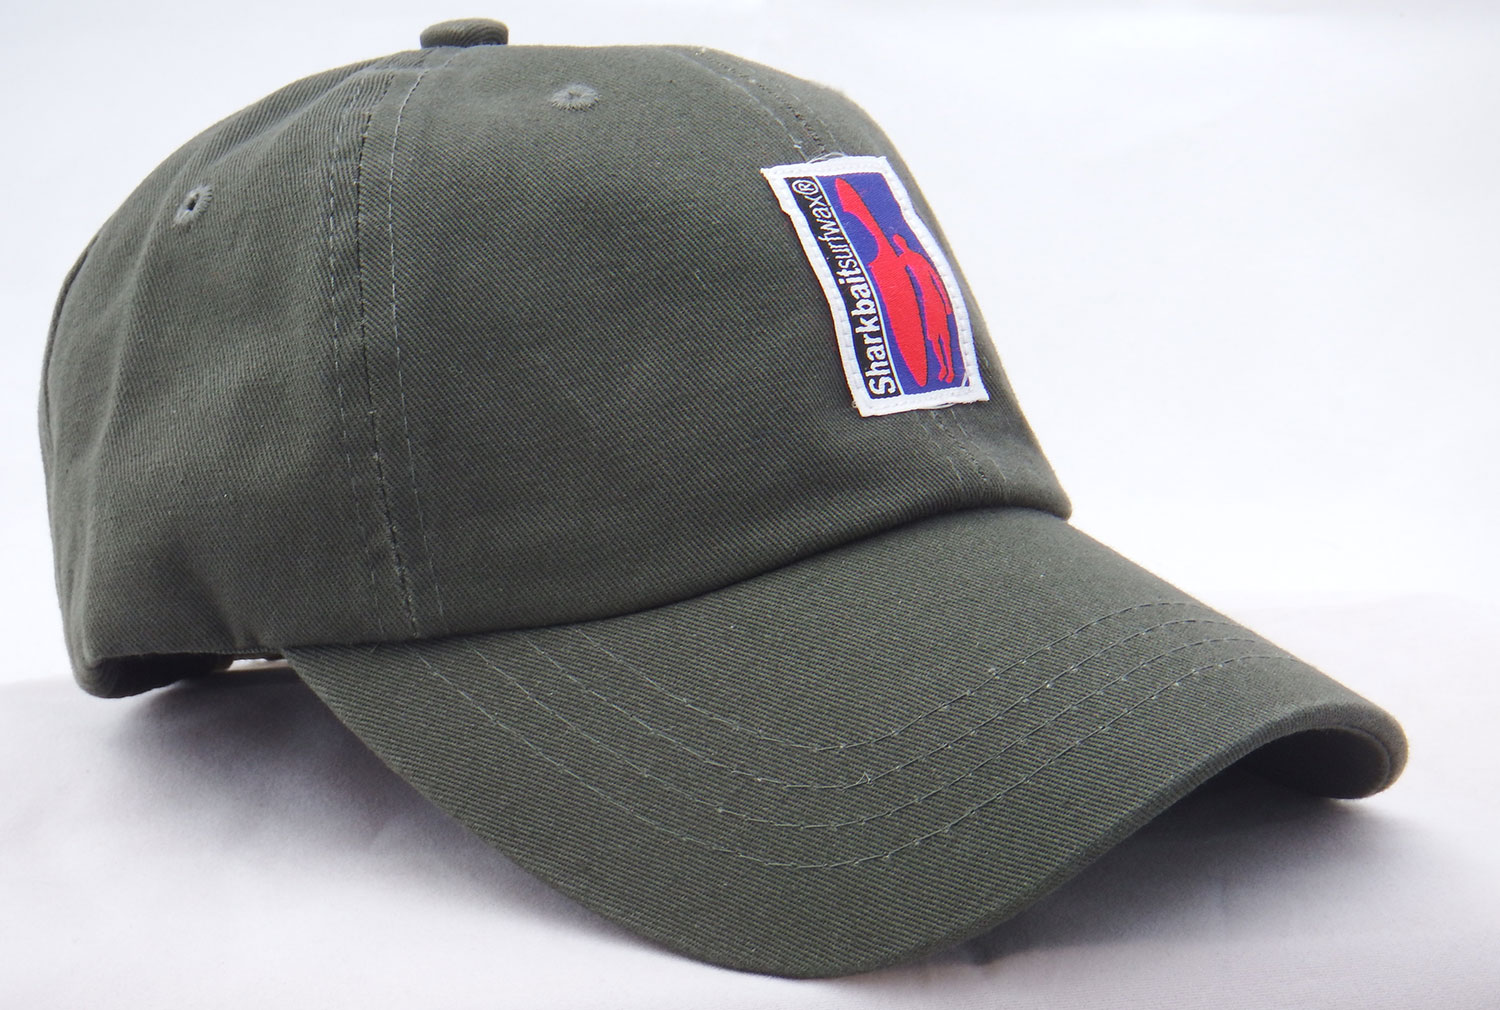 Sharkbait olive green baseball cap with sewn on label